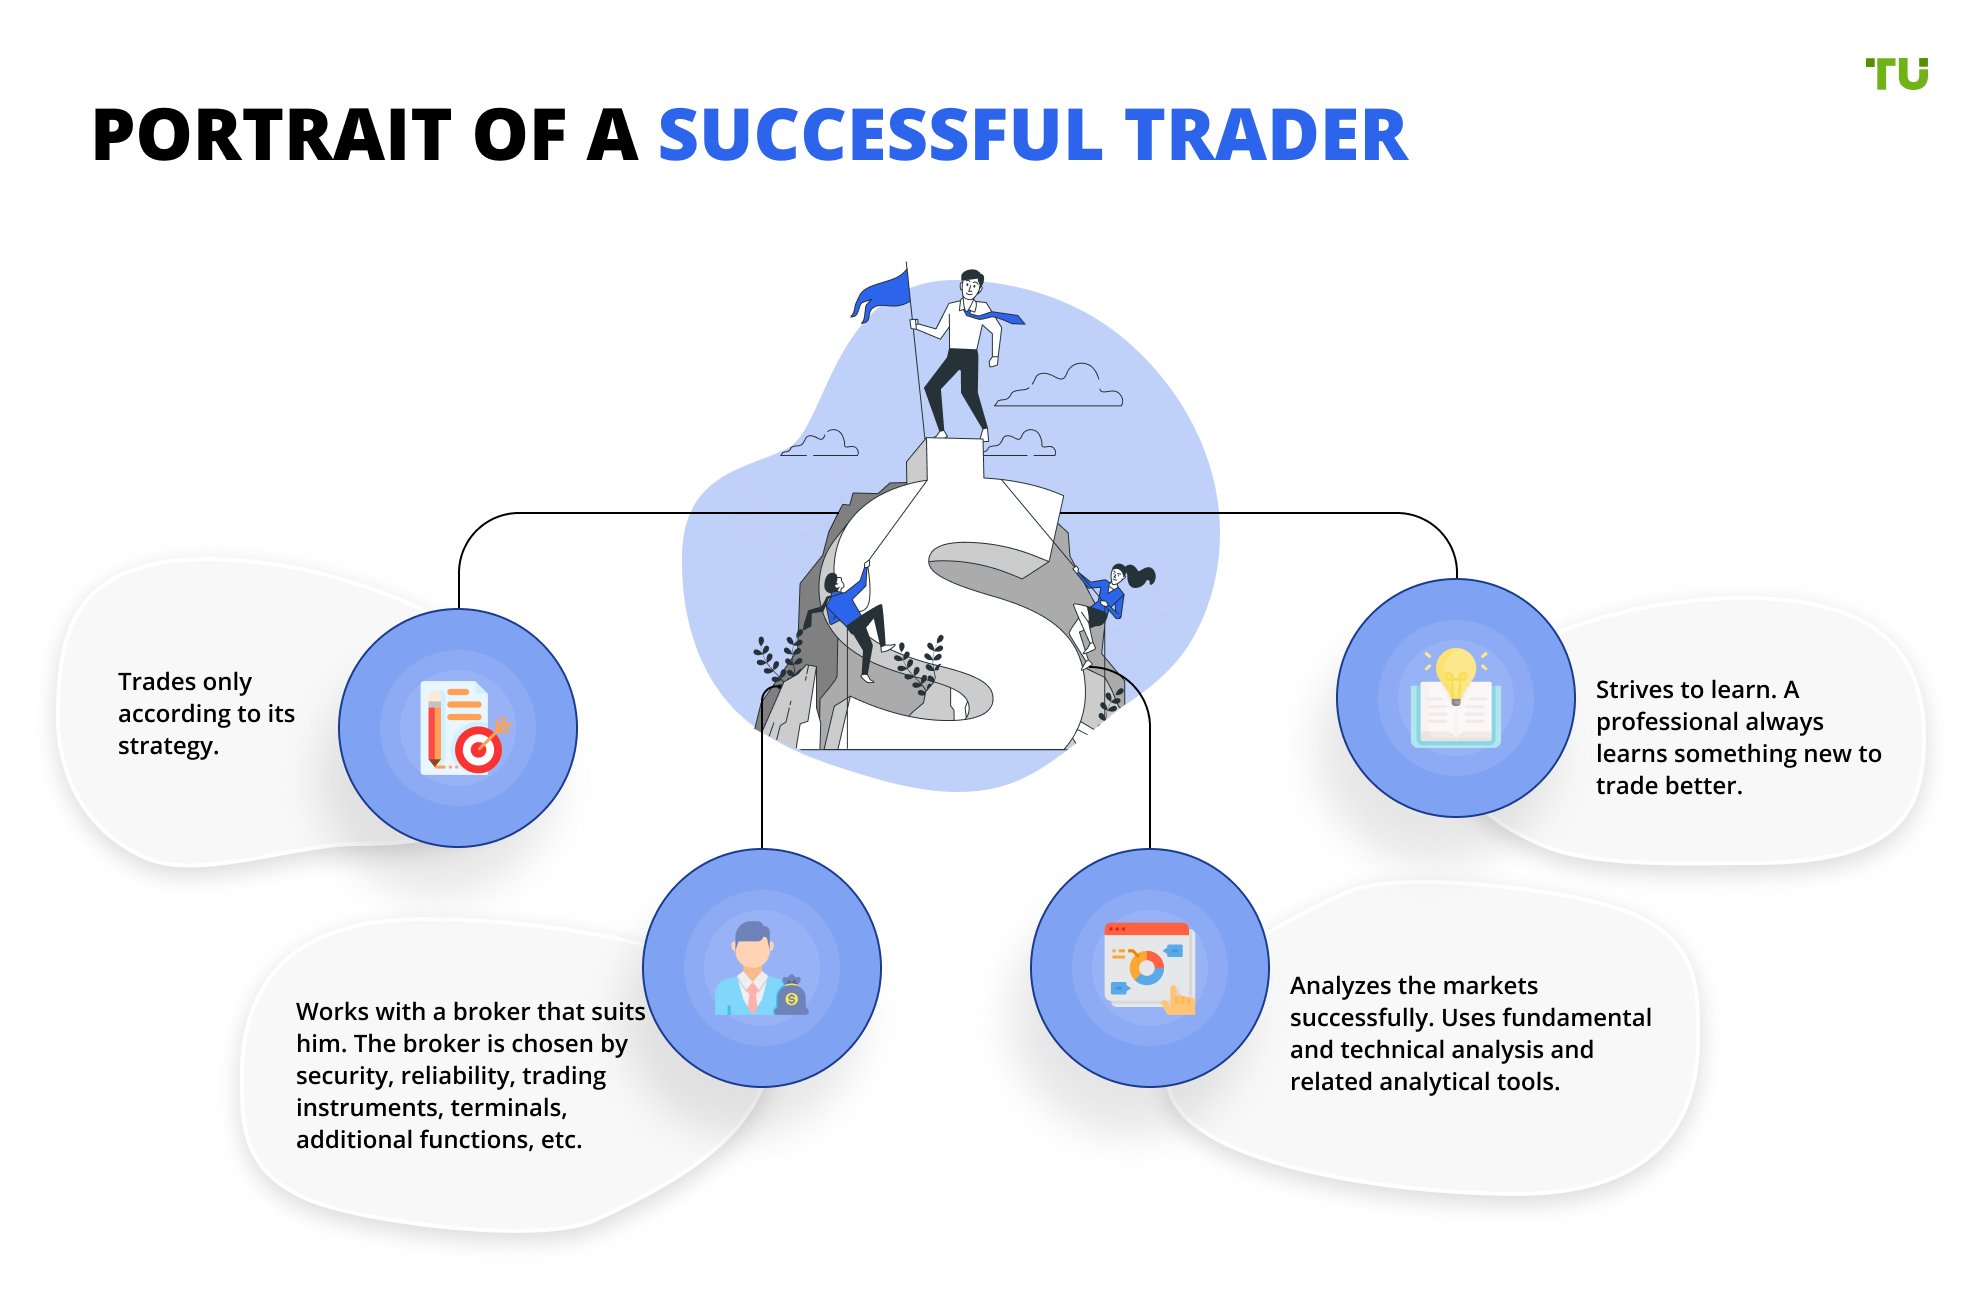 5 Forex Trading Tips to Be a Successful Trader